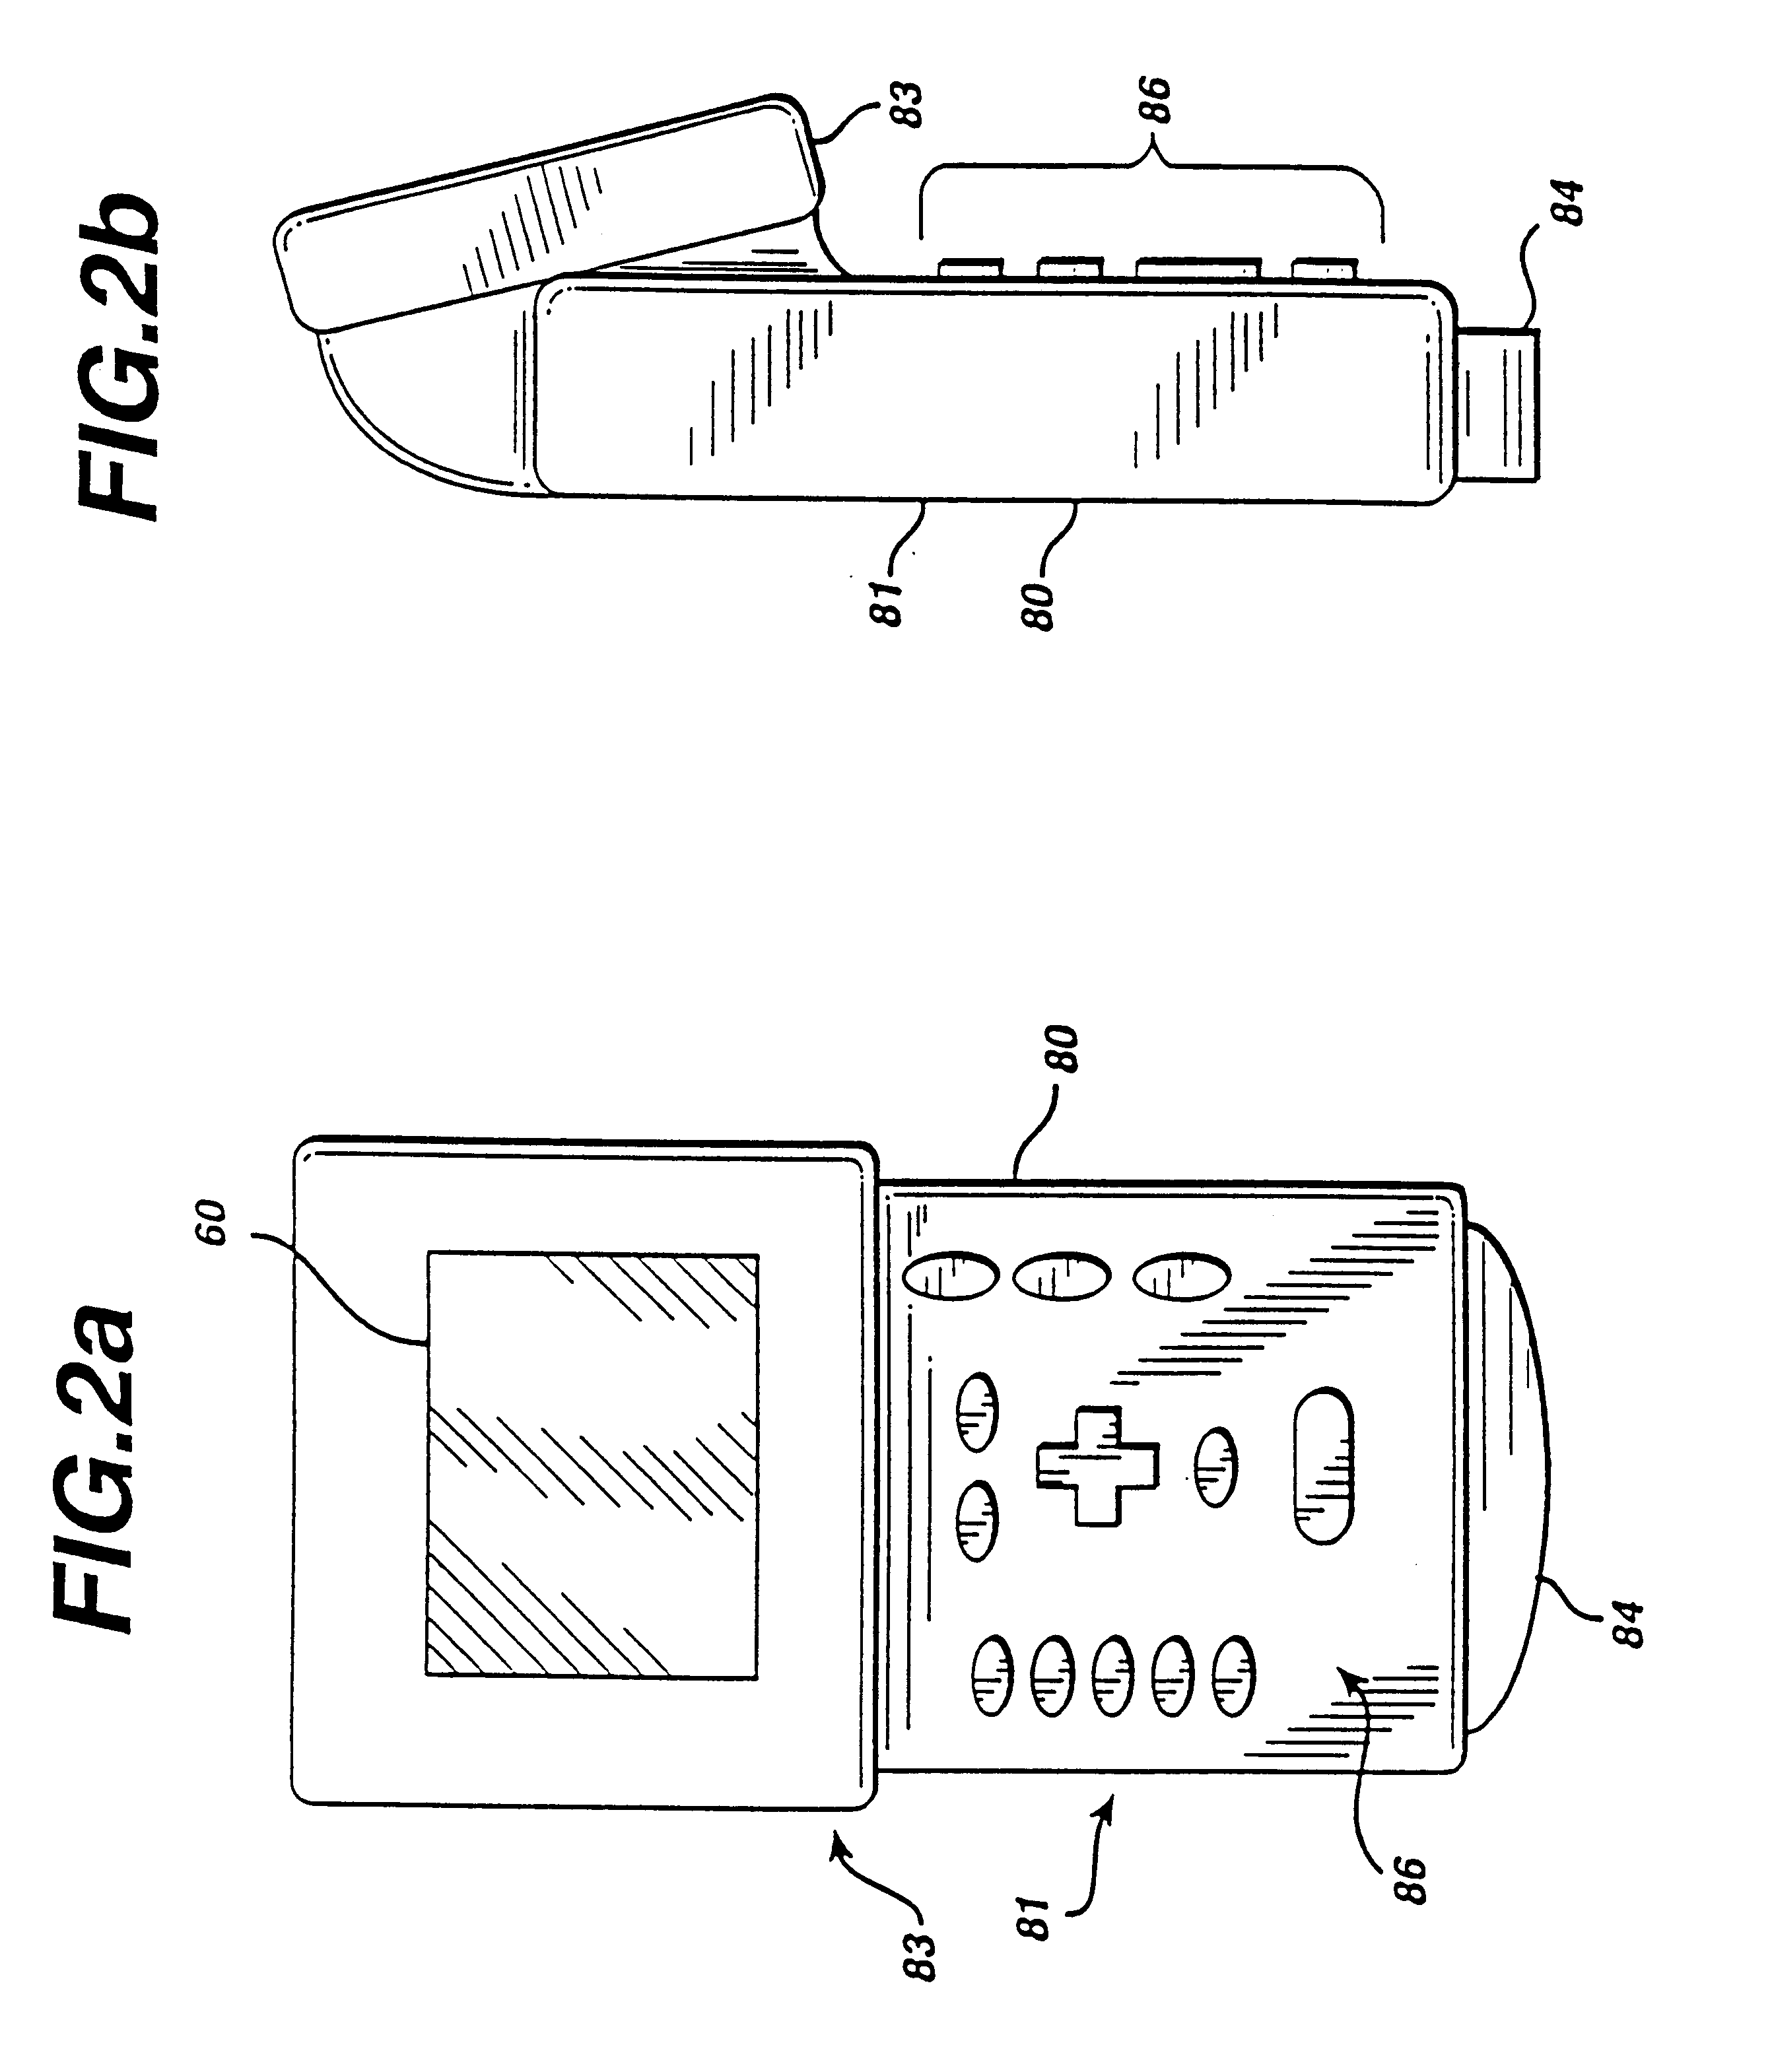 Ultrasonic imaging device with integral display